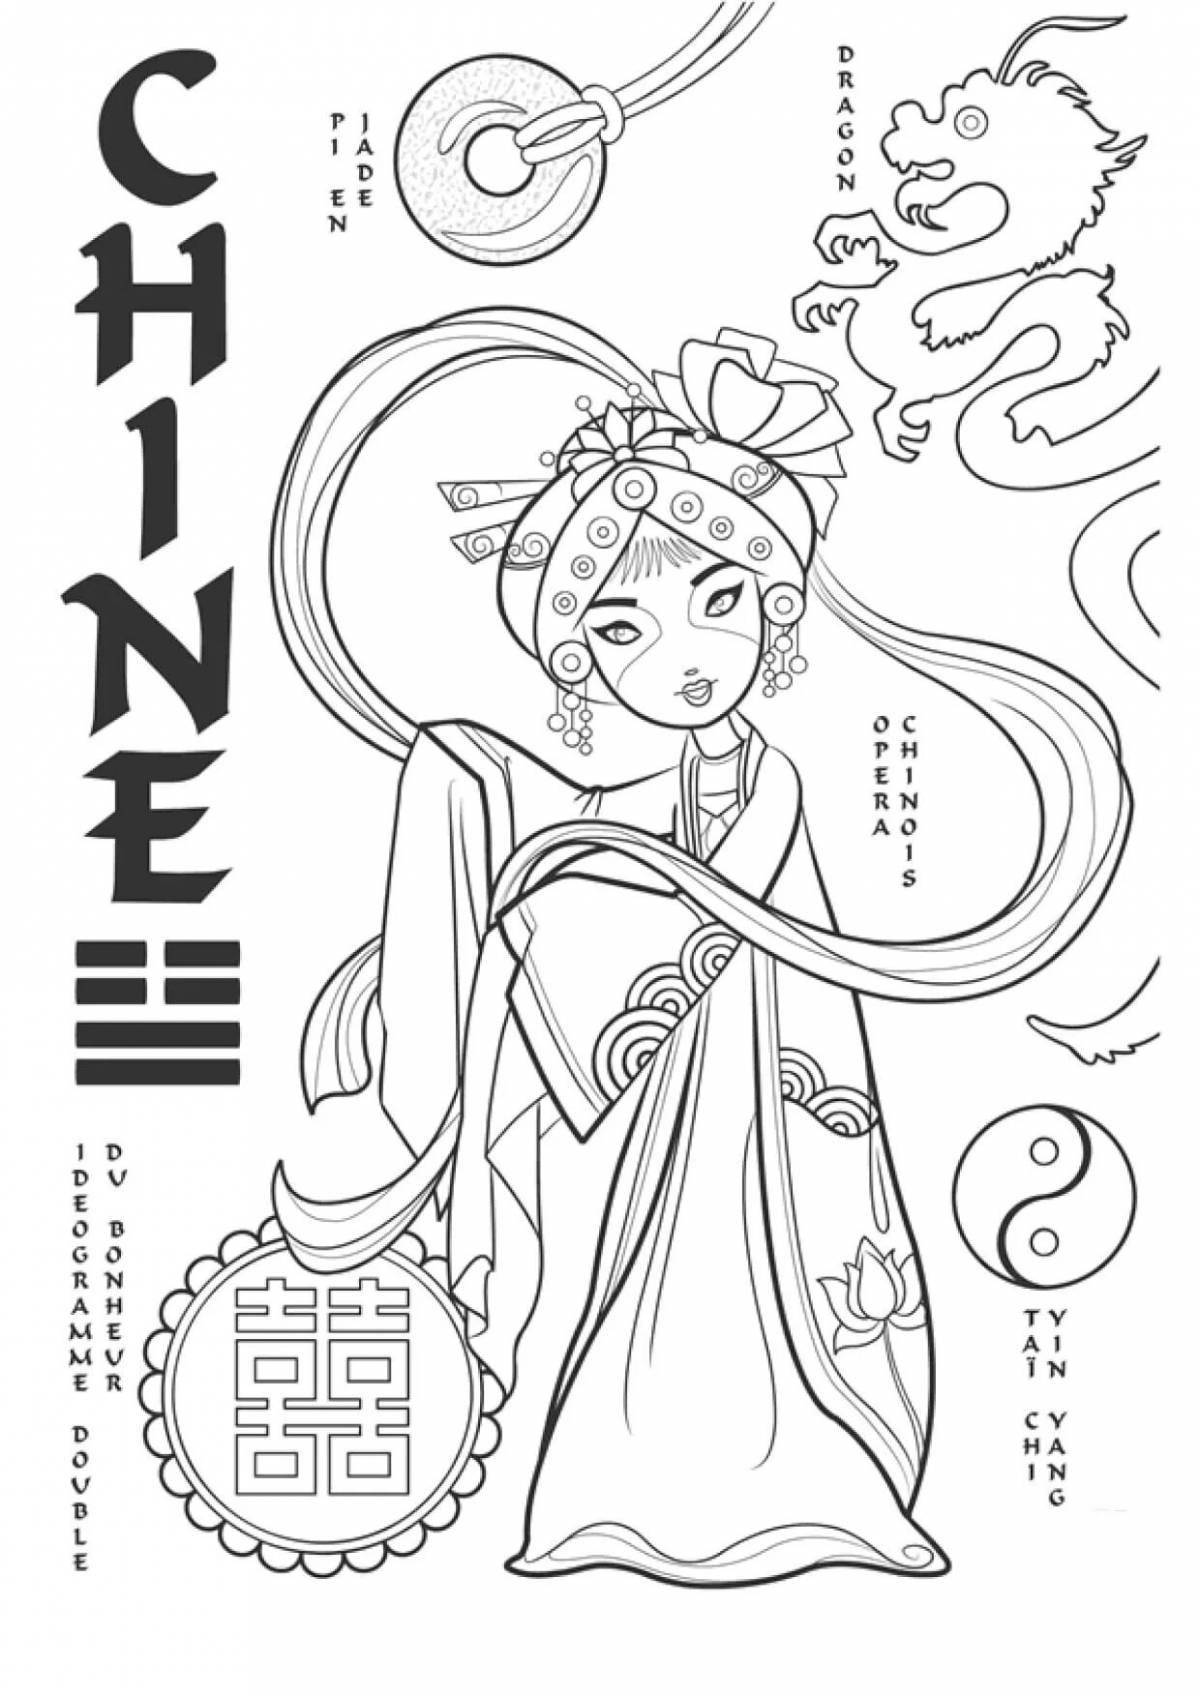 Fun Chinese coloring book for kids